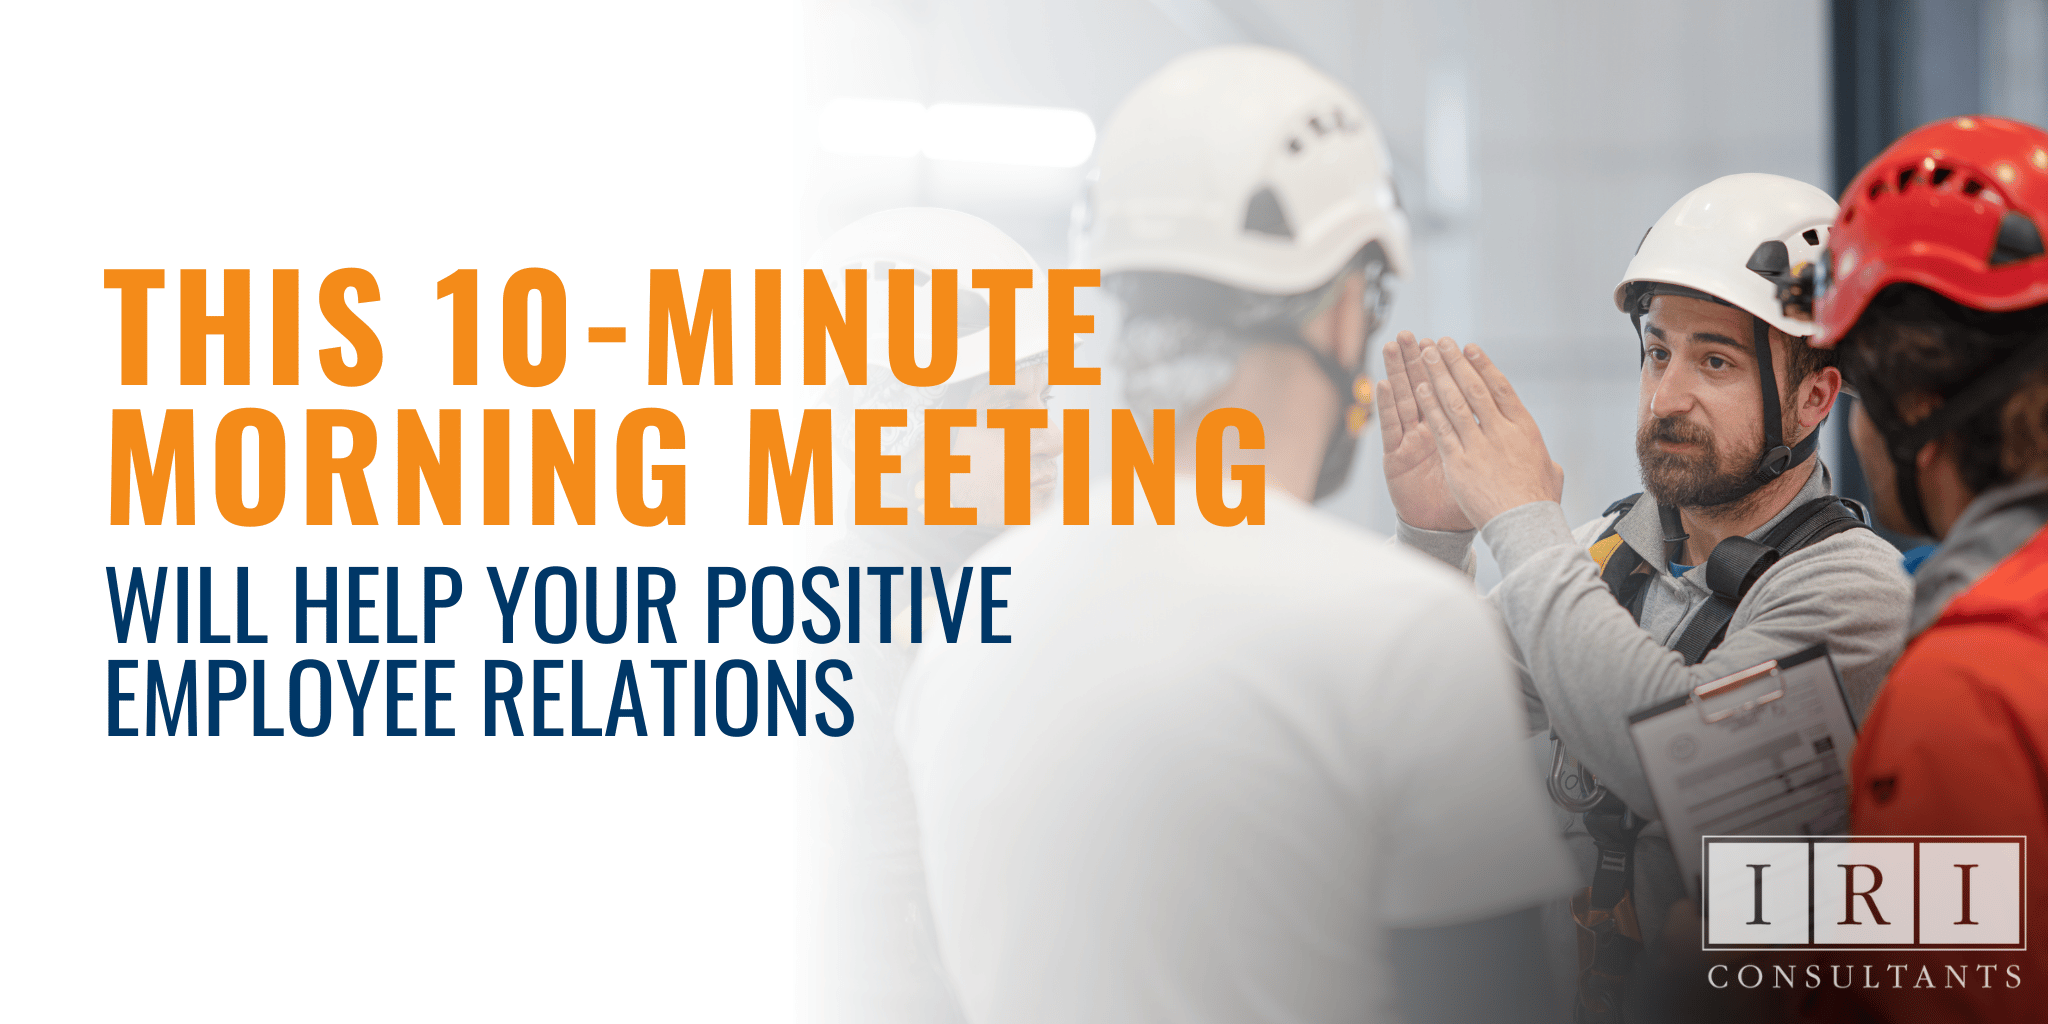 10-Minute Morning Meeting Will Help Positive Employee Relations